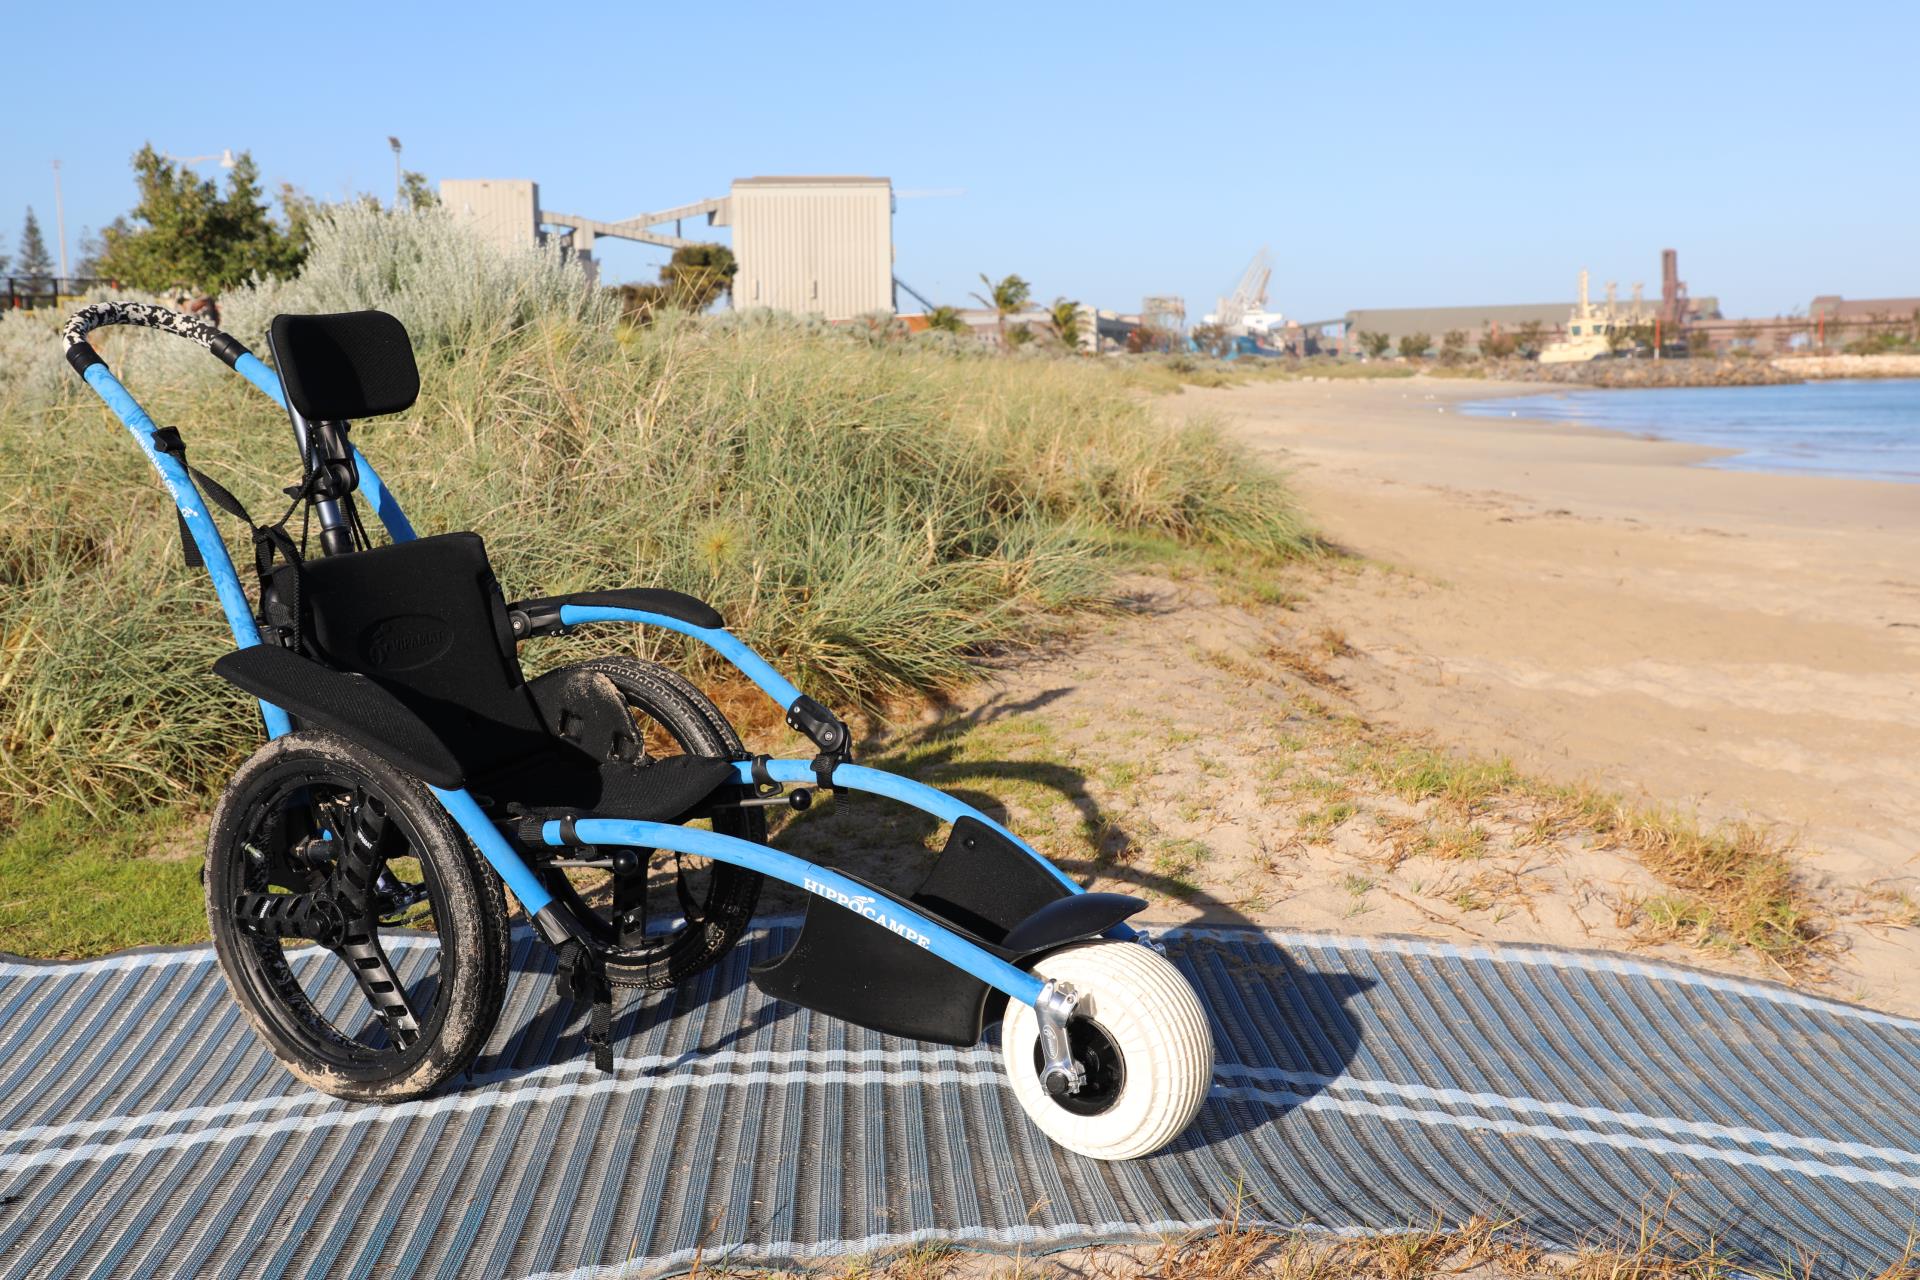 One of the beach wheelchairs available to loan